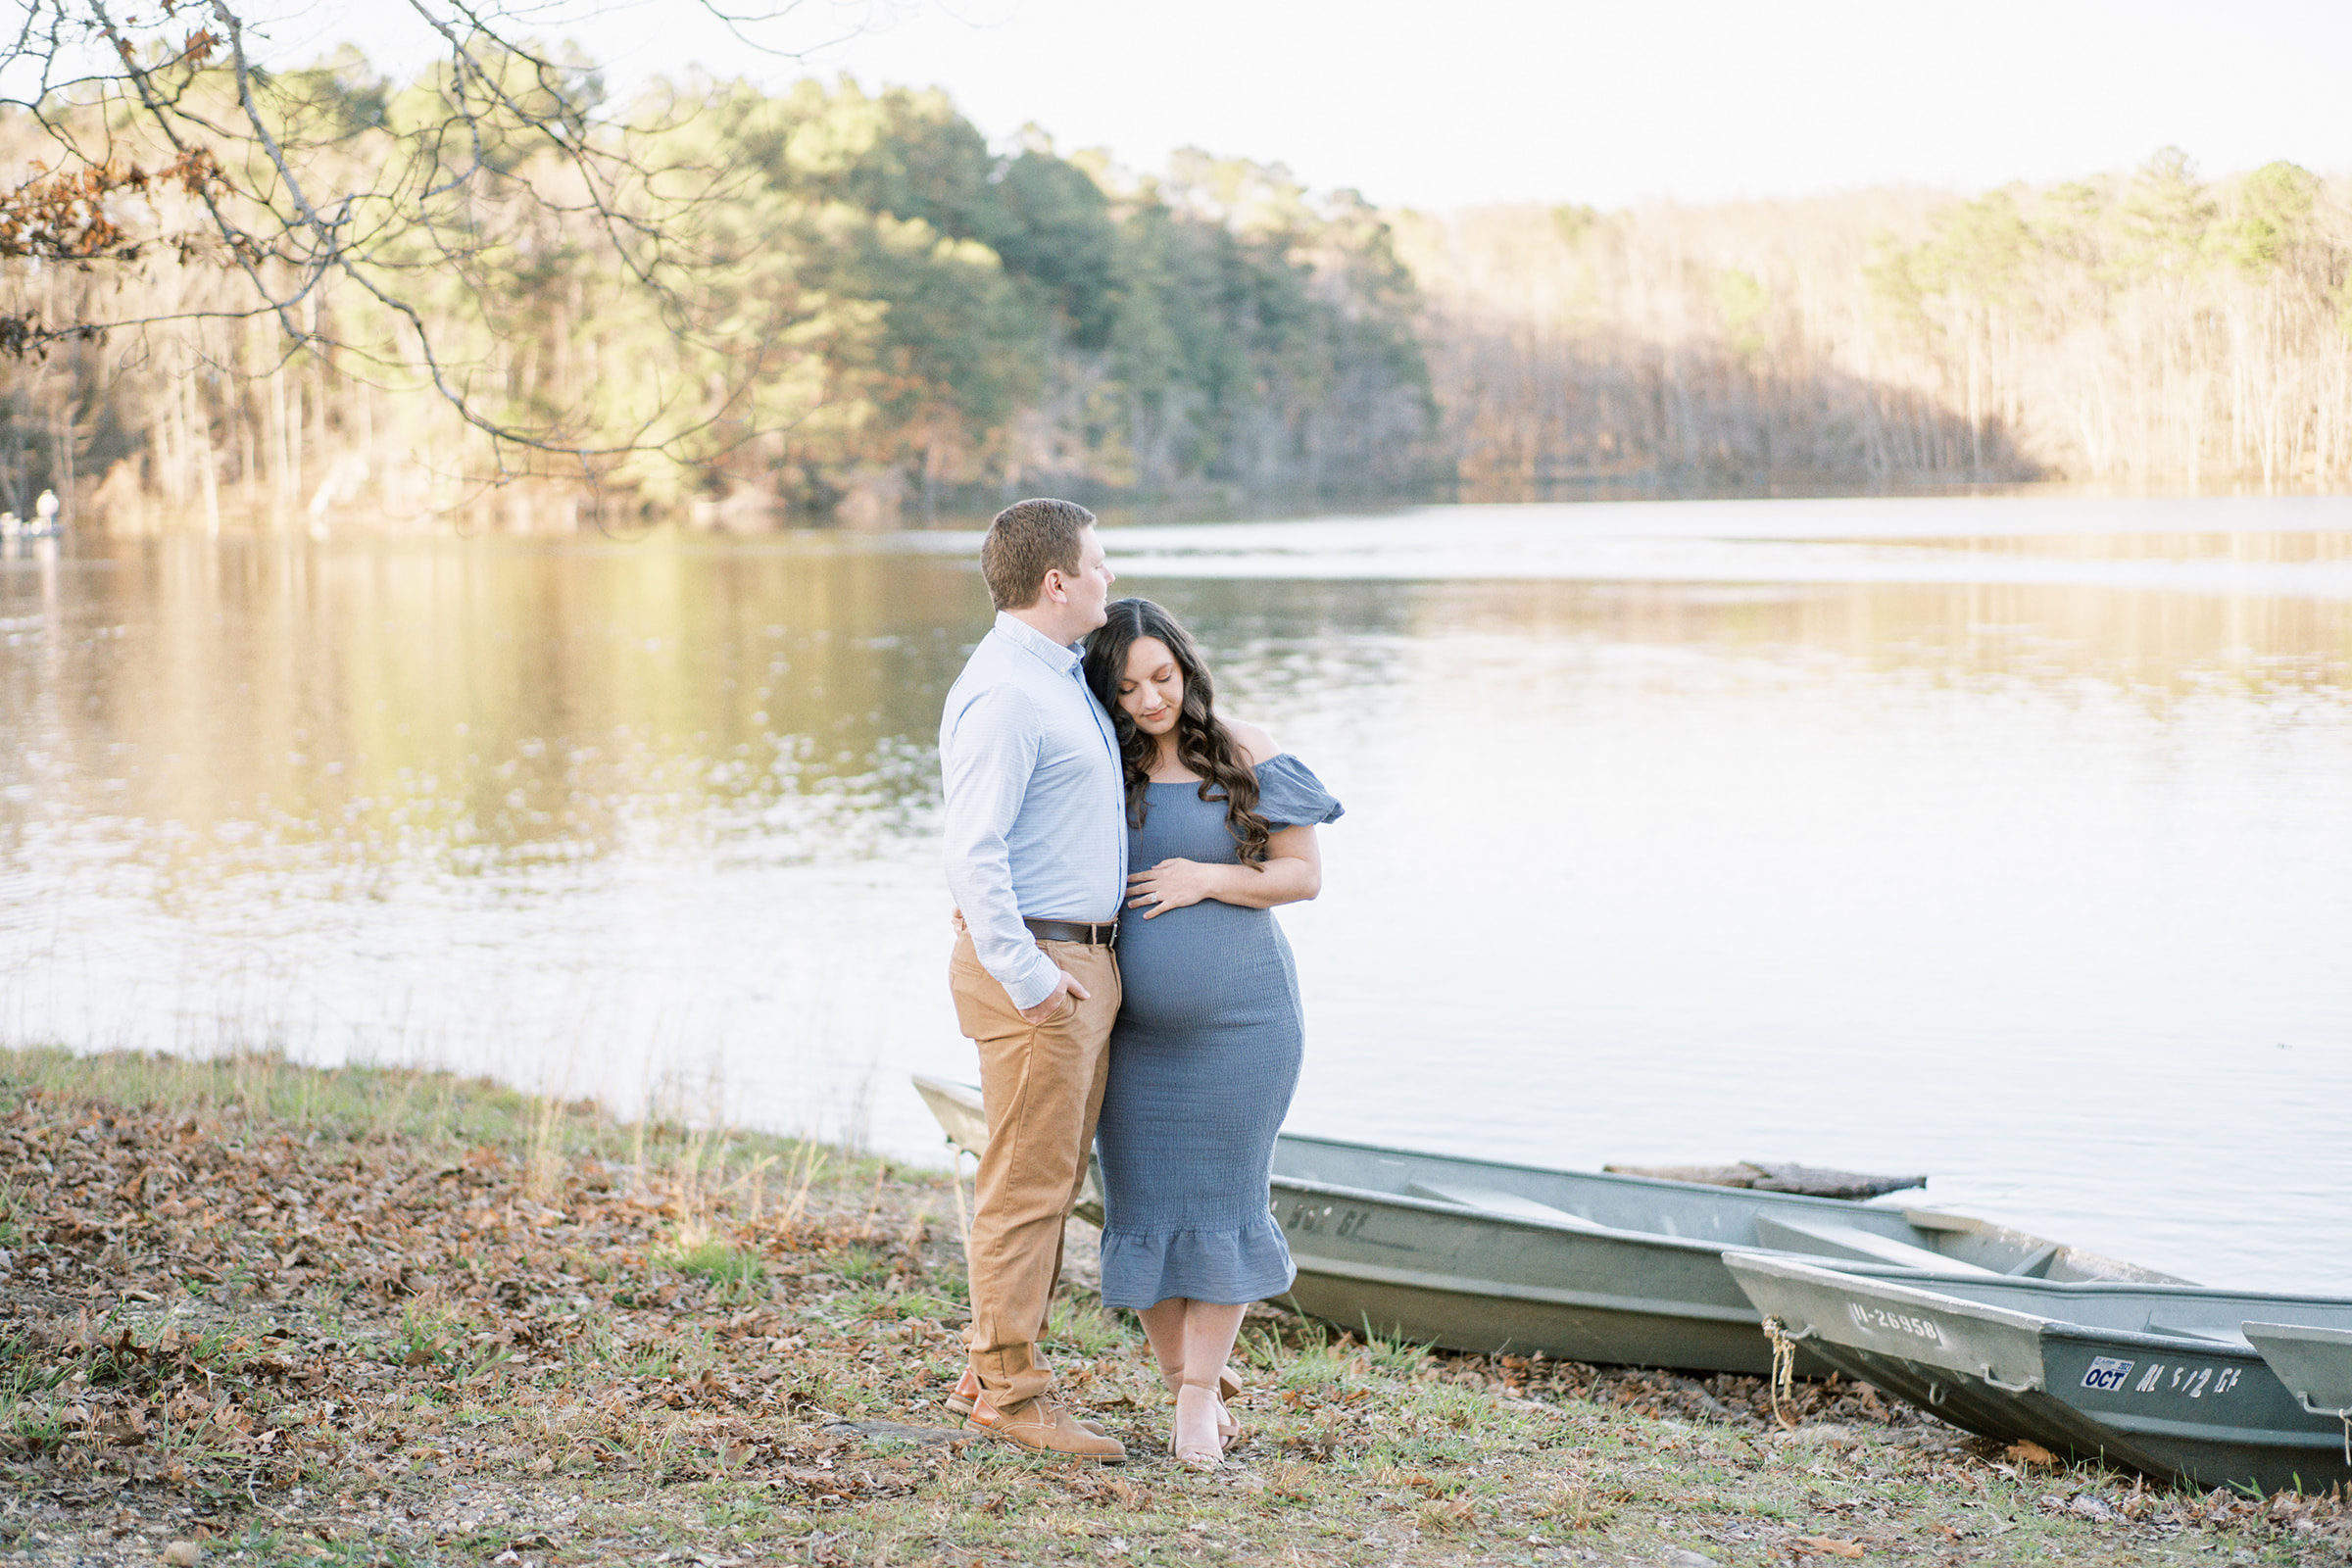 Husband and wife embrace in front of DeKalb County Lake during intimate maternity photography session